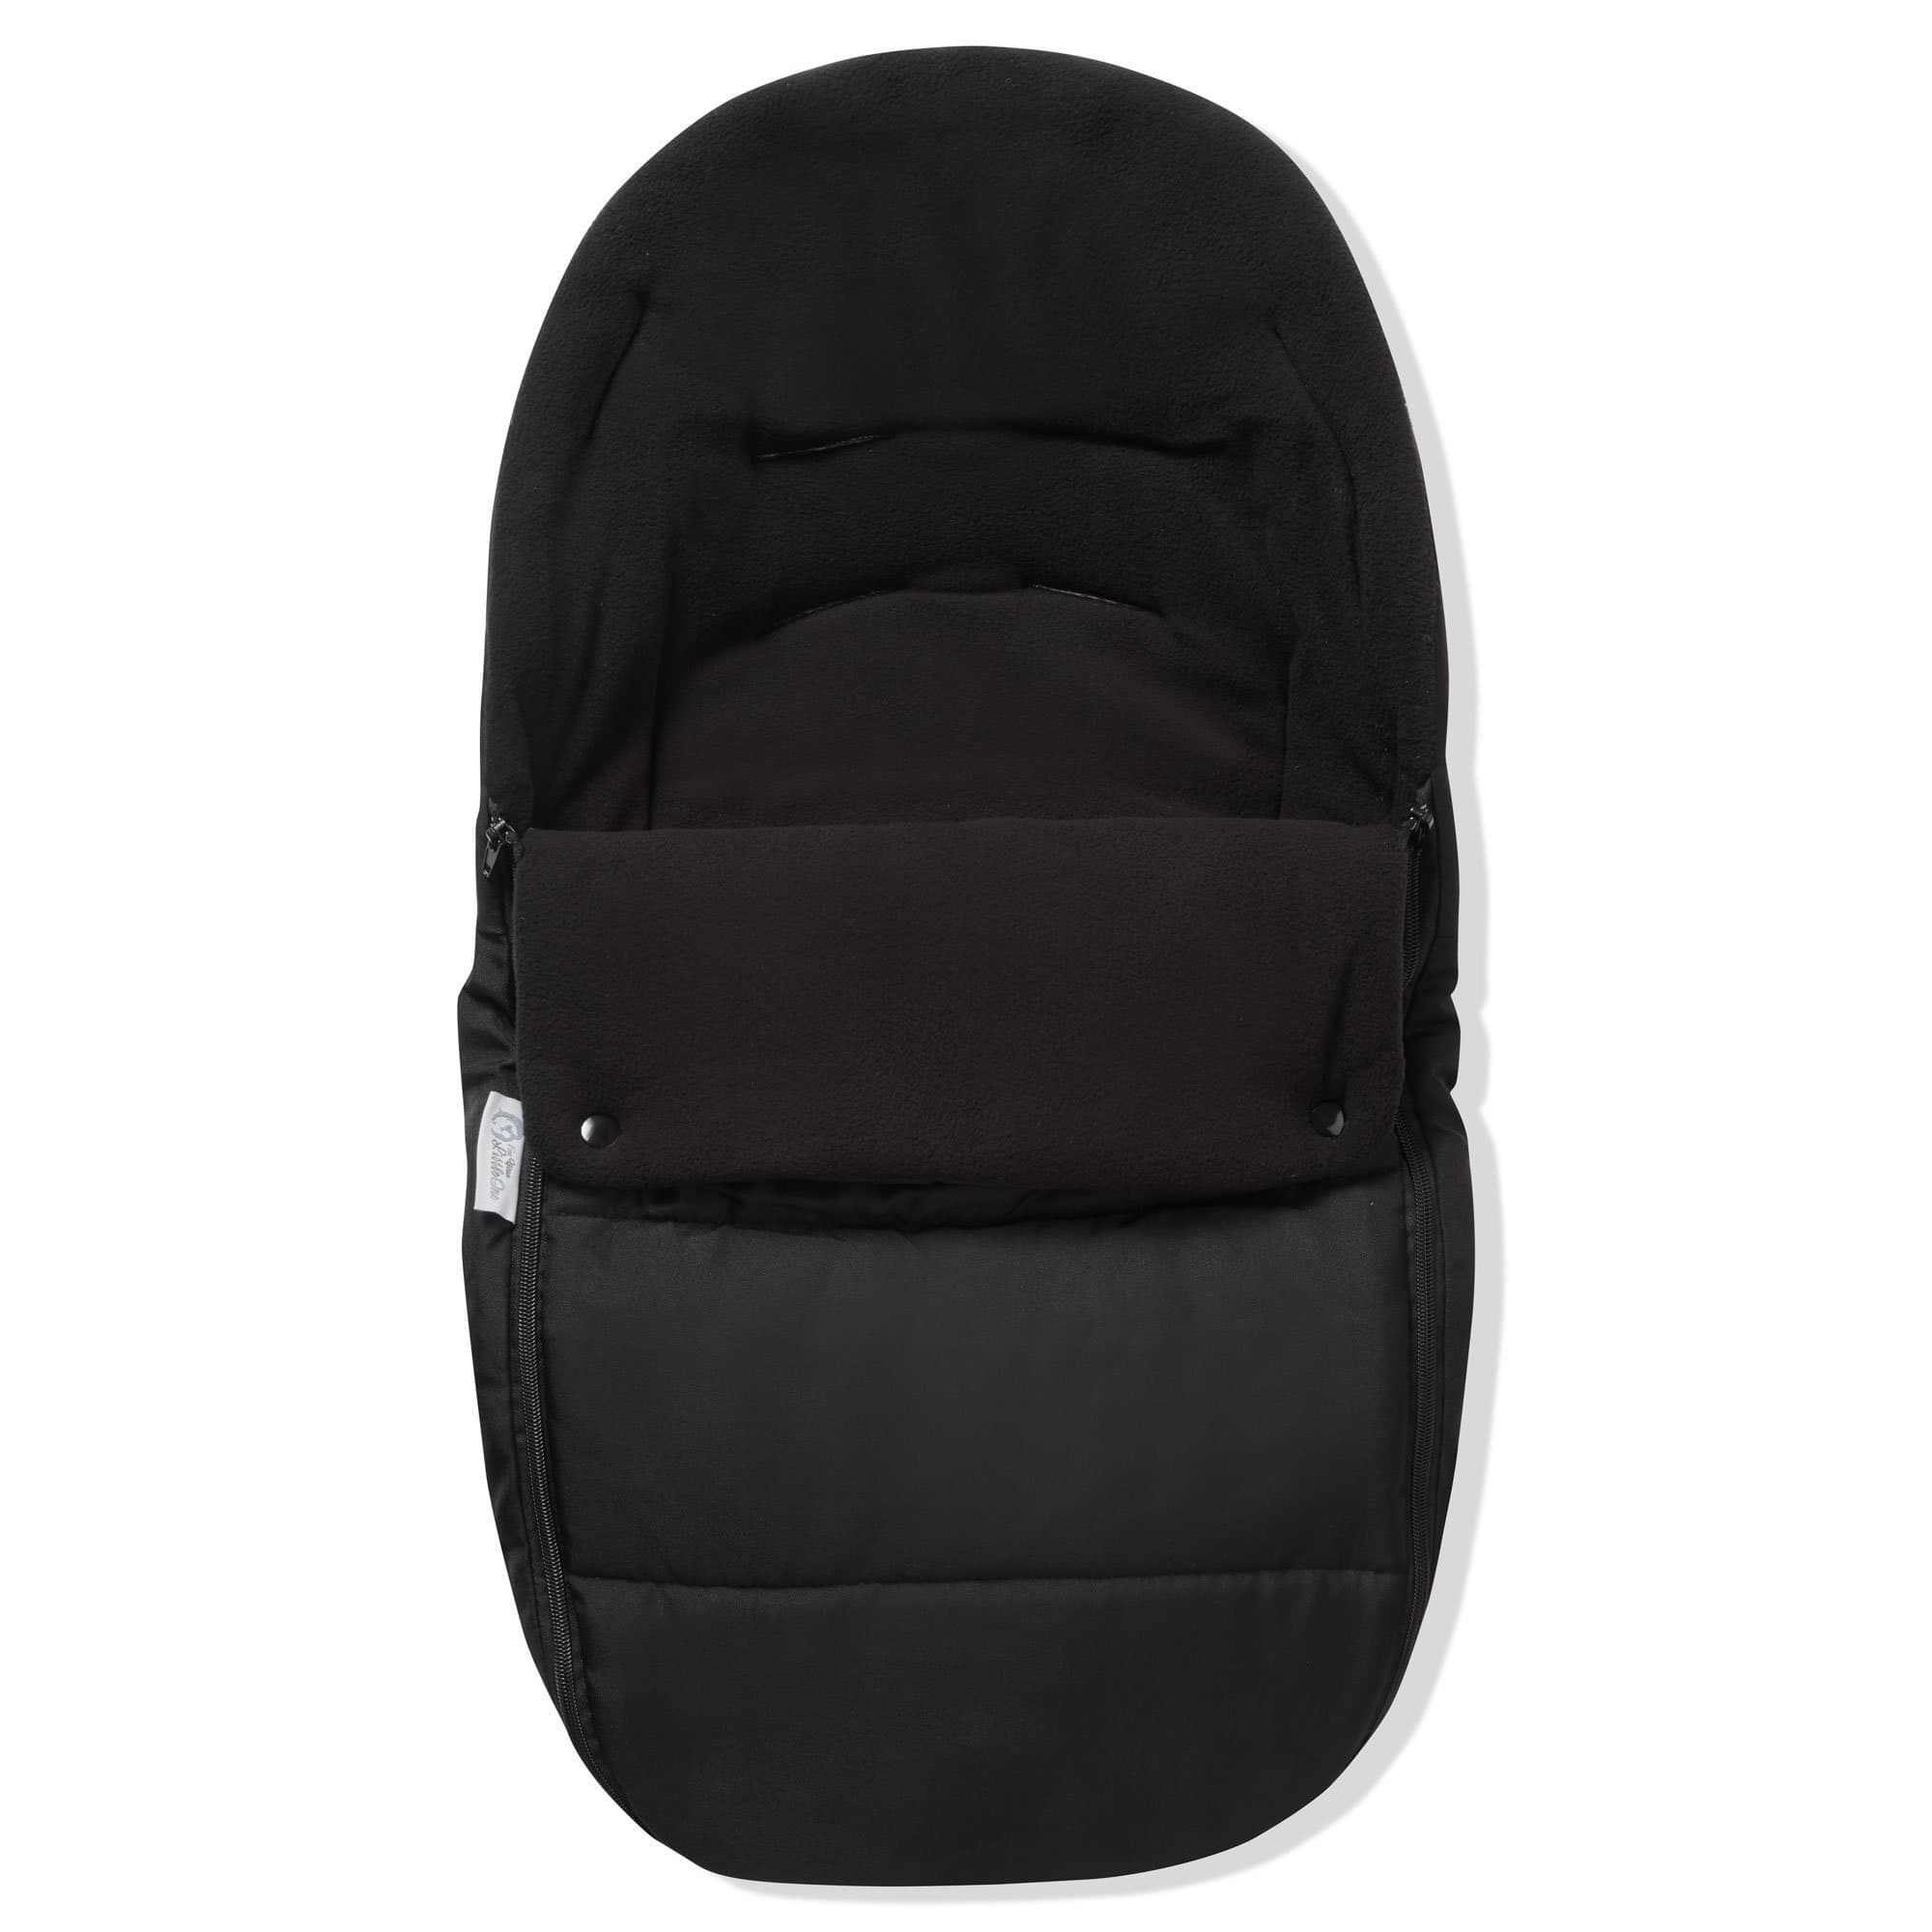 Premium Car Seat Footmuff / Cosy Toes Compatible with Nania - Black Jack / Fits All Models | For Your Little One